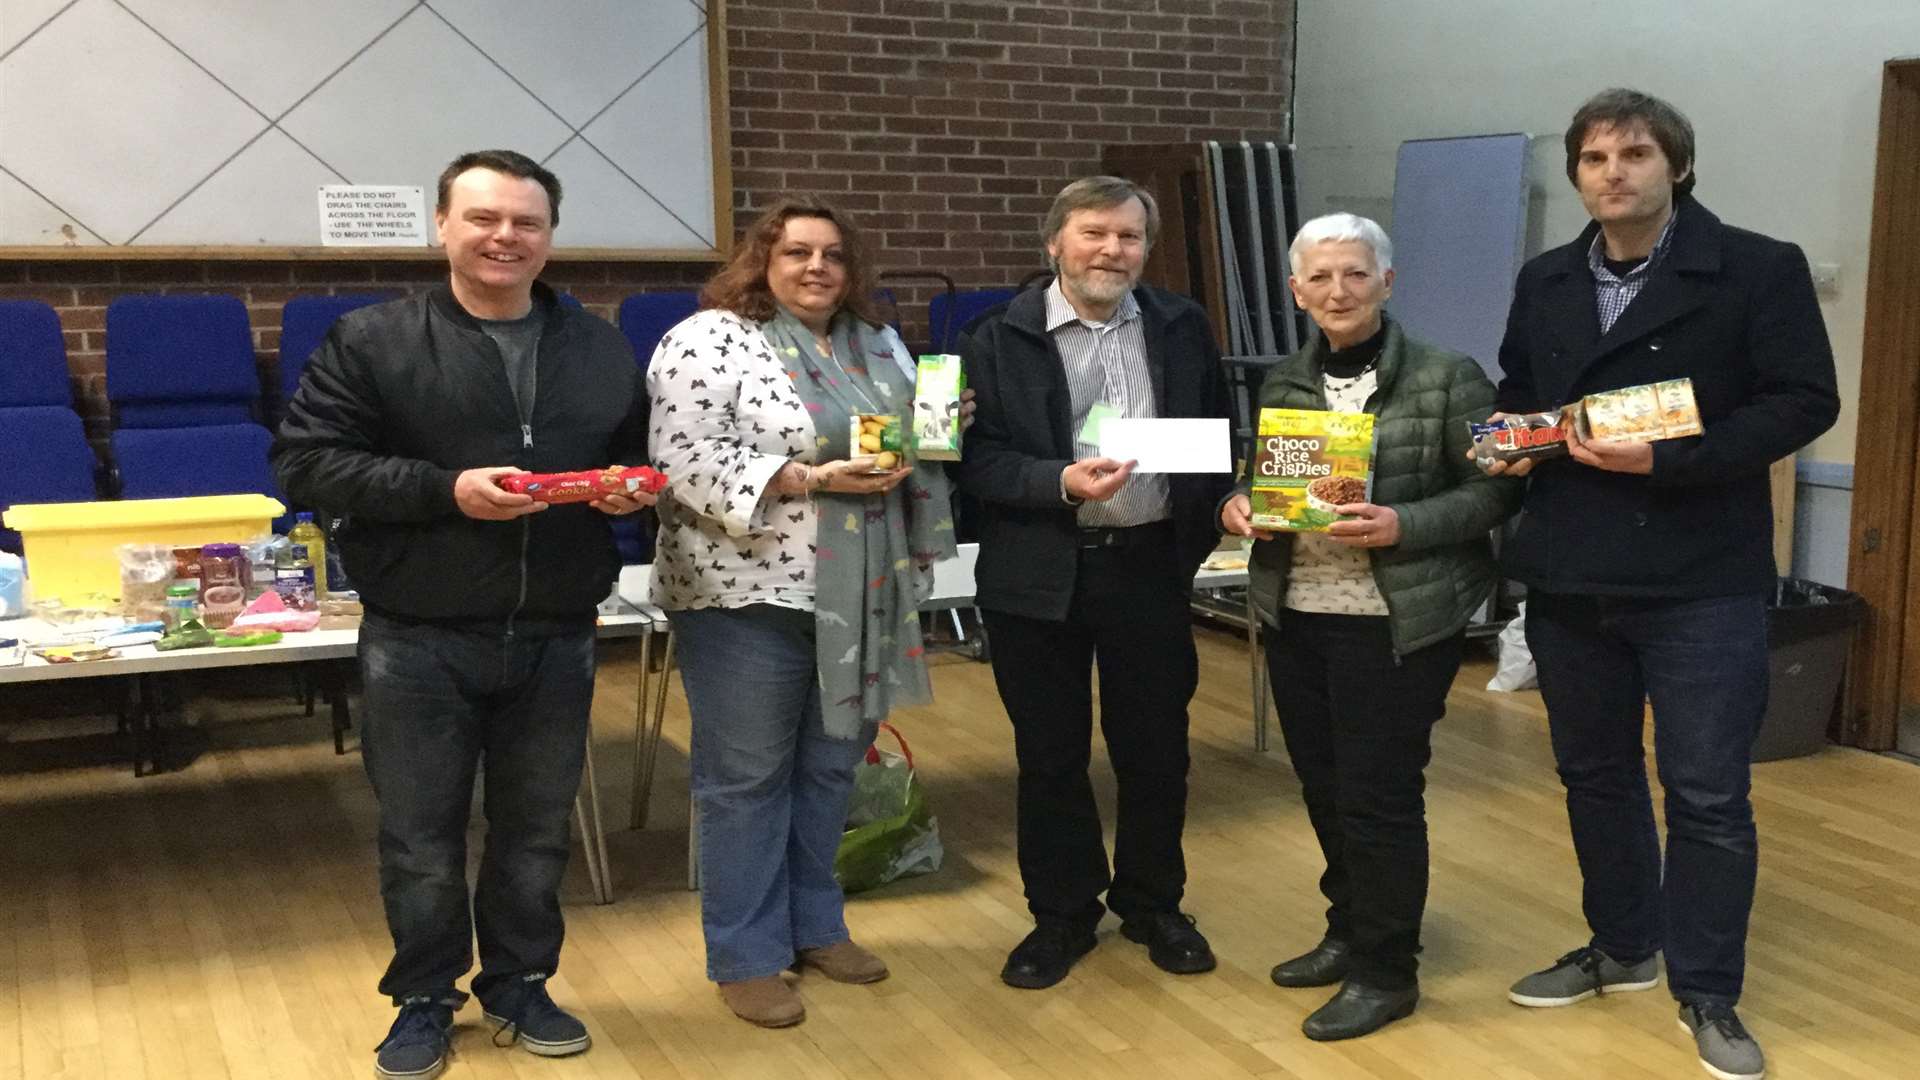 The cheque presentation to Dover Foodbank by the local Labour party. Pictured are John Heron, Sue Jones, Jon Wheeler, Pam Brivio and Peter Wallace.